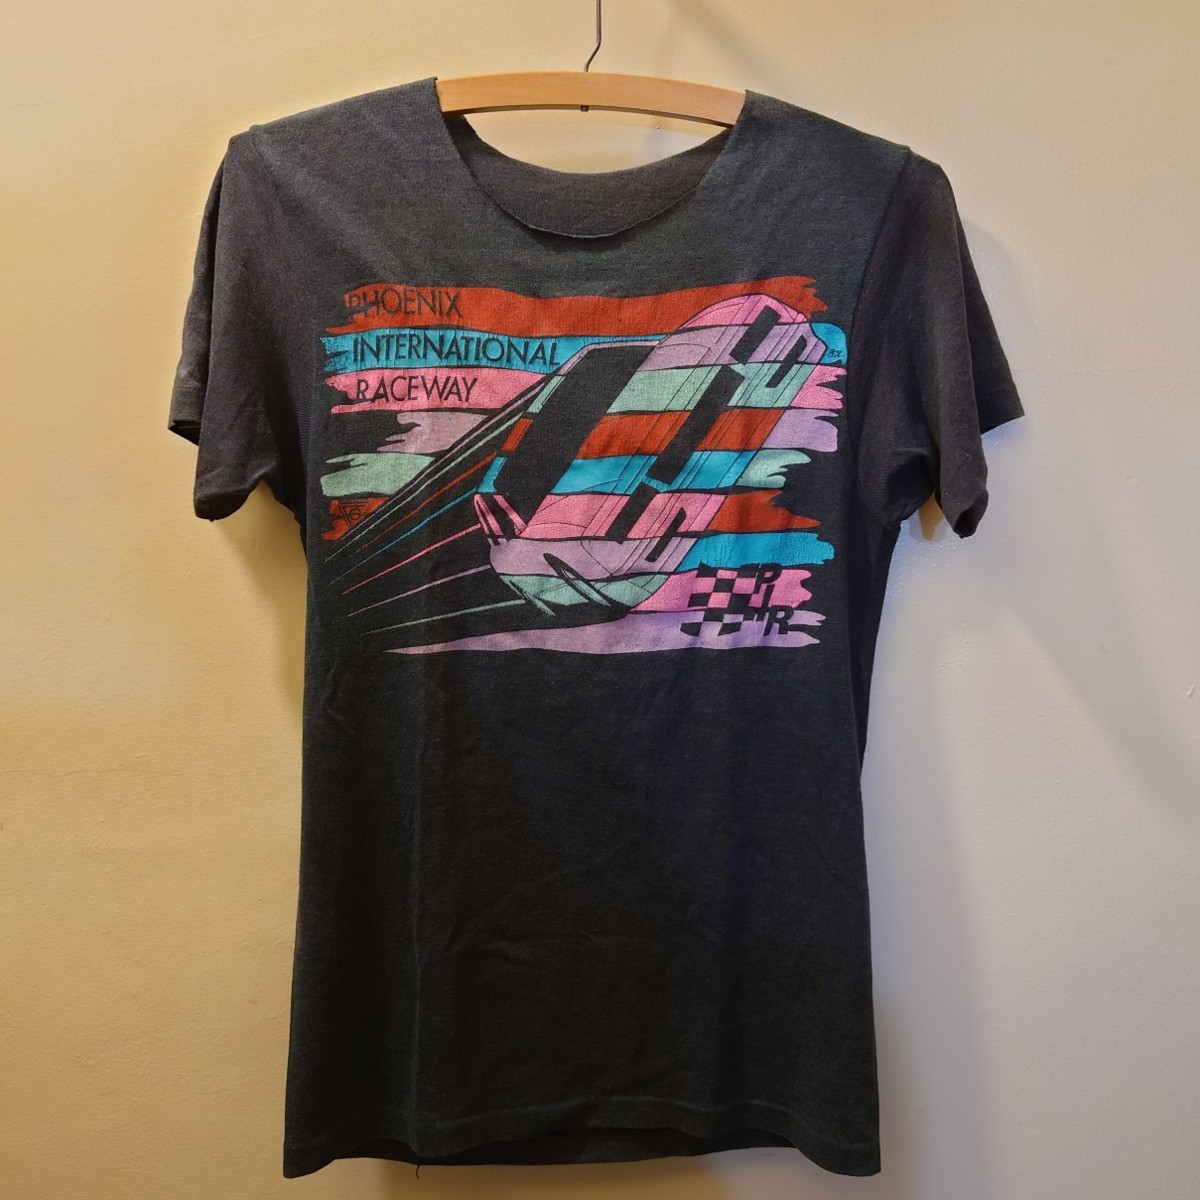 ８０s TEE Tシャツ 古着 ヴィンテージ レトロ VINTAGE